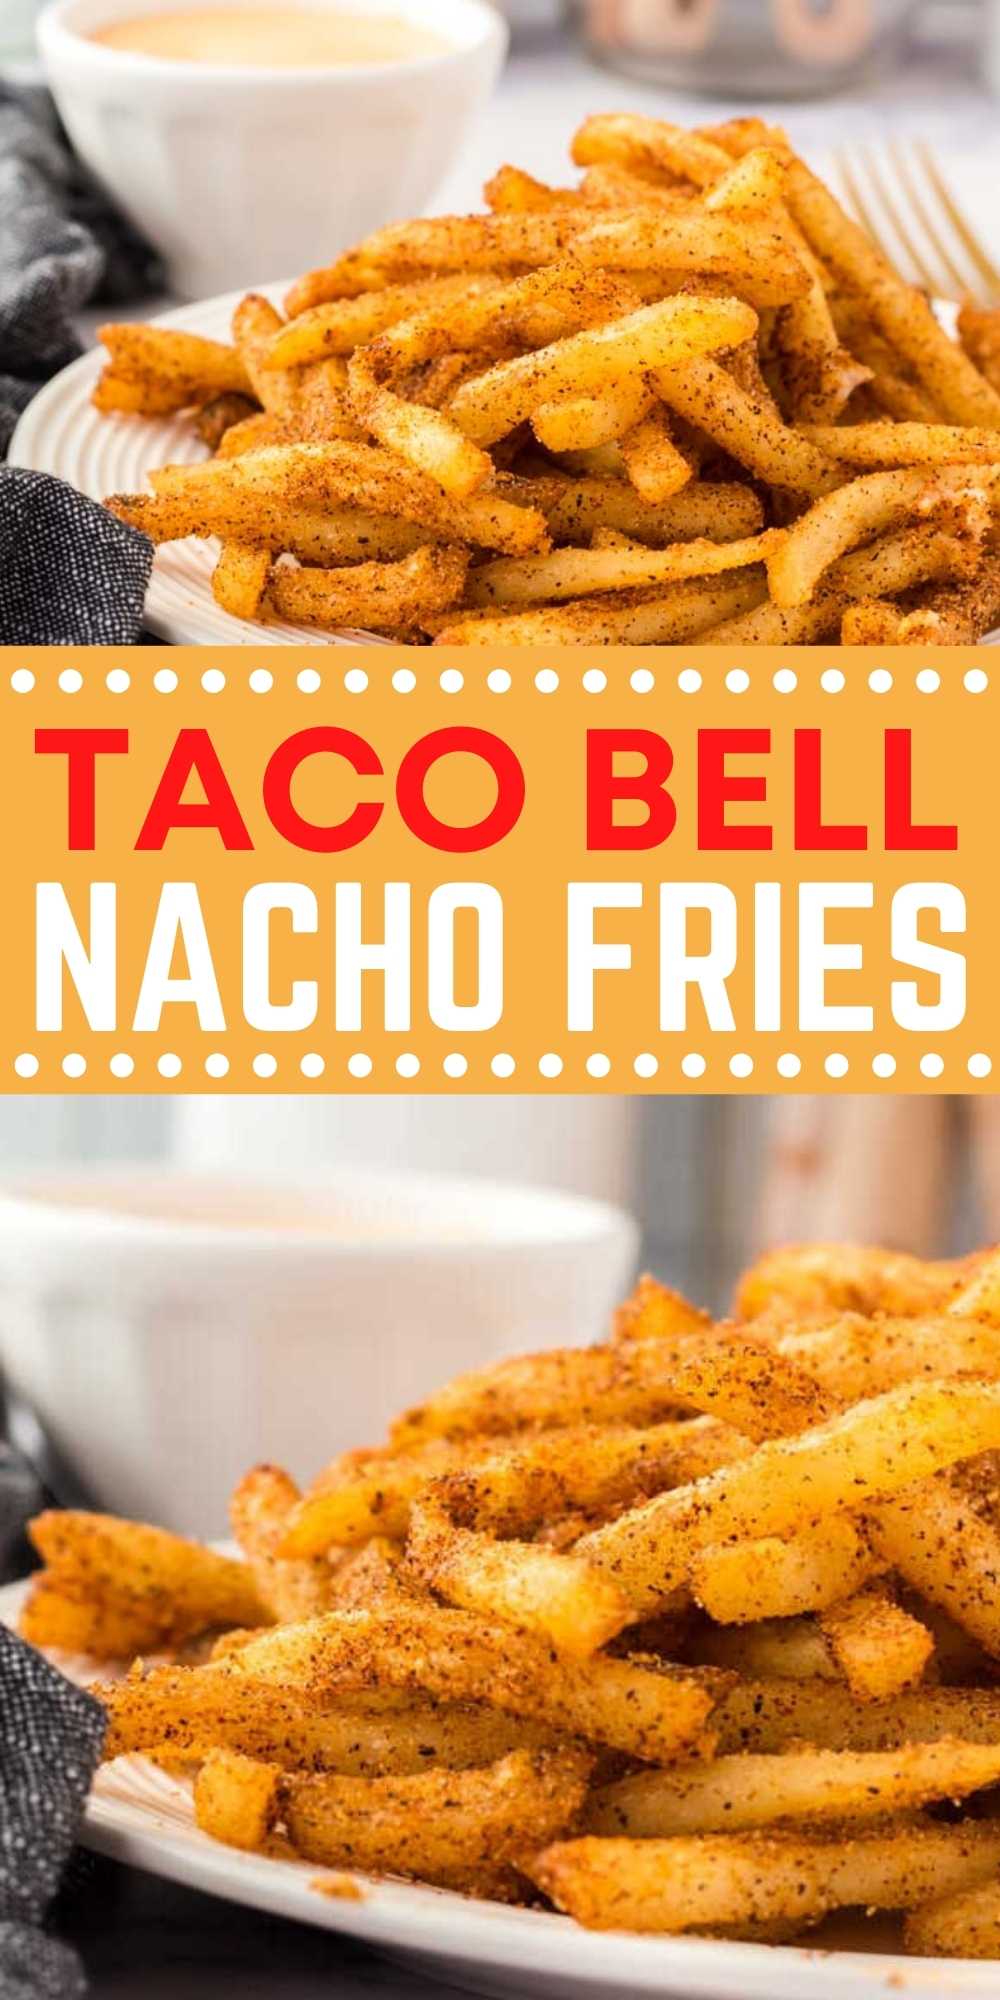 Copycat Taco Bell Nacho Fries recipe is easy to make at home . It doesn't get much better than fries dipped in cheese sauce. This DIY homemade nacho fries include a seasoning recipe and cheese sauce recipe too.  Learn how to make these Taco Bell Nacho Fries at home. #eatingonadime #copycatrecipes #tacobellrecipes #sidedishrecipes 